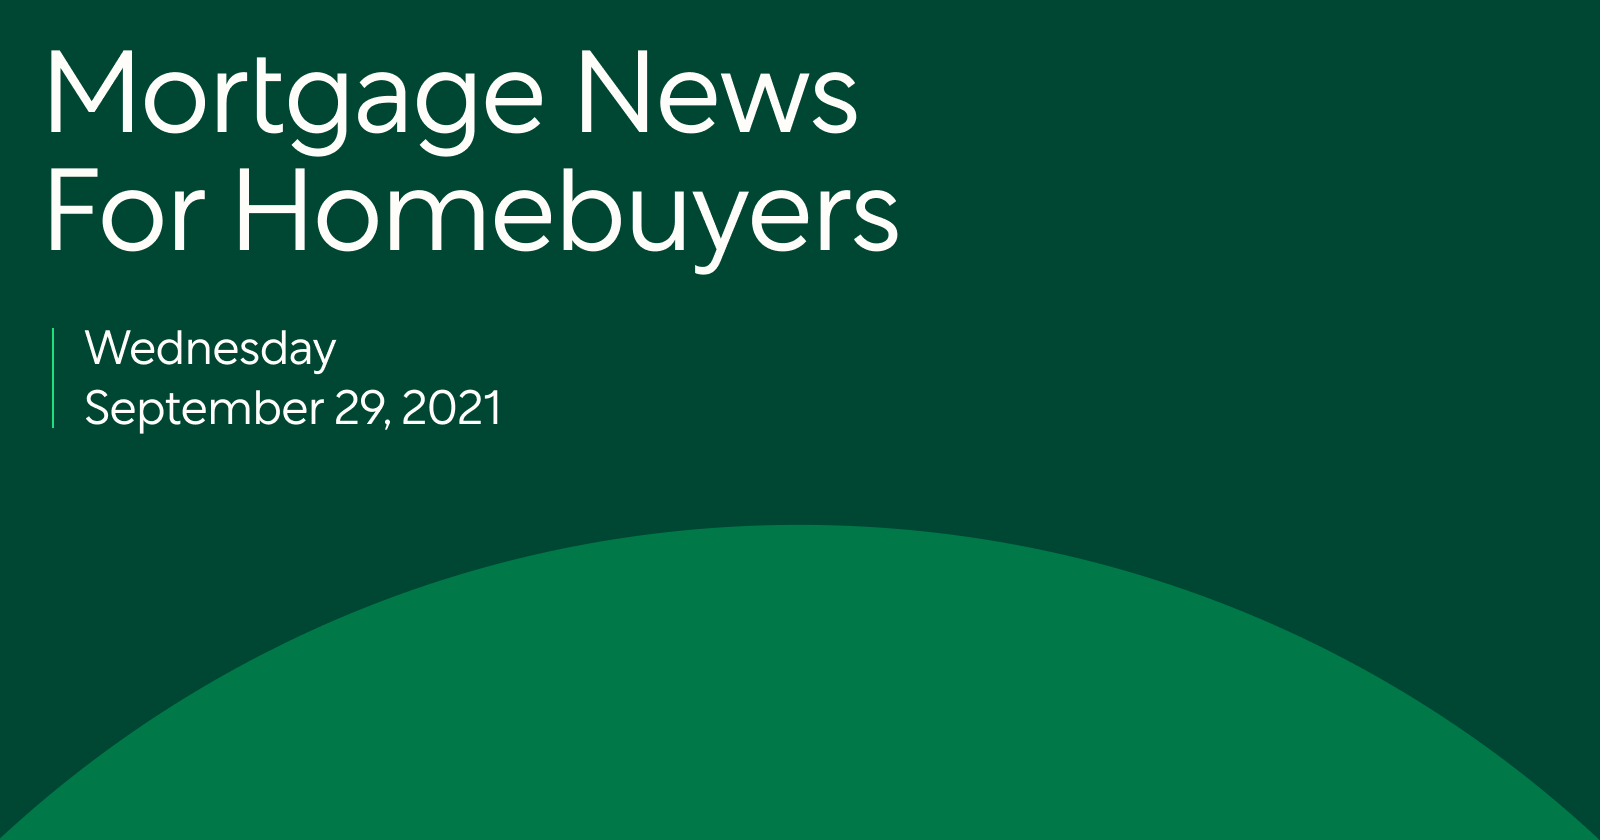 Mortgage News: More Newly Built Homes May Be On The Way